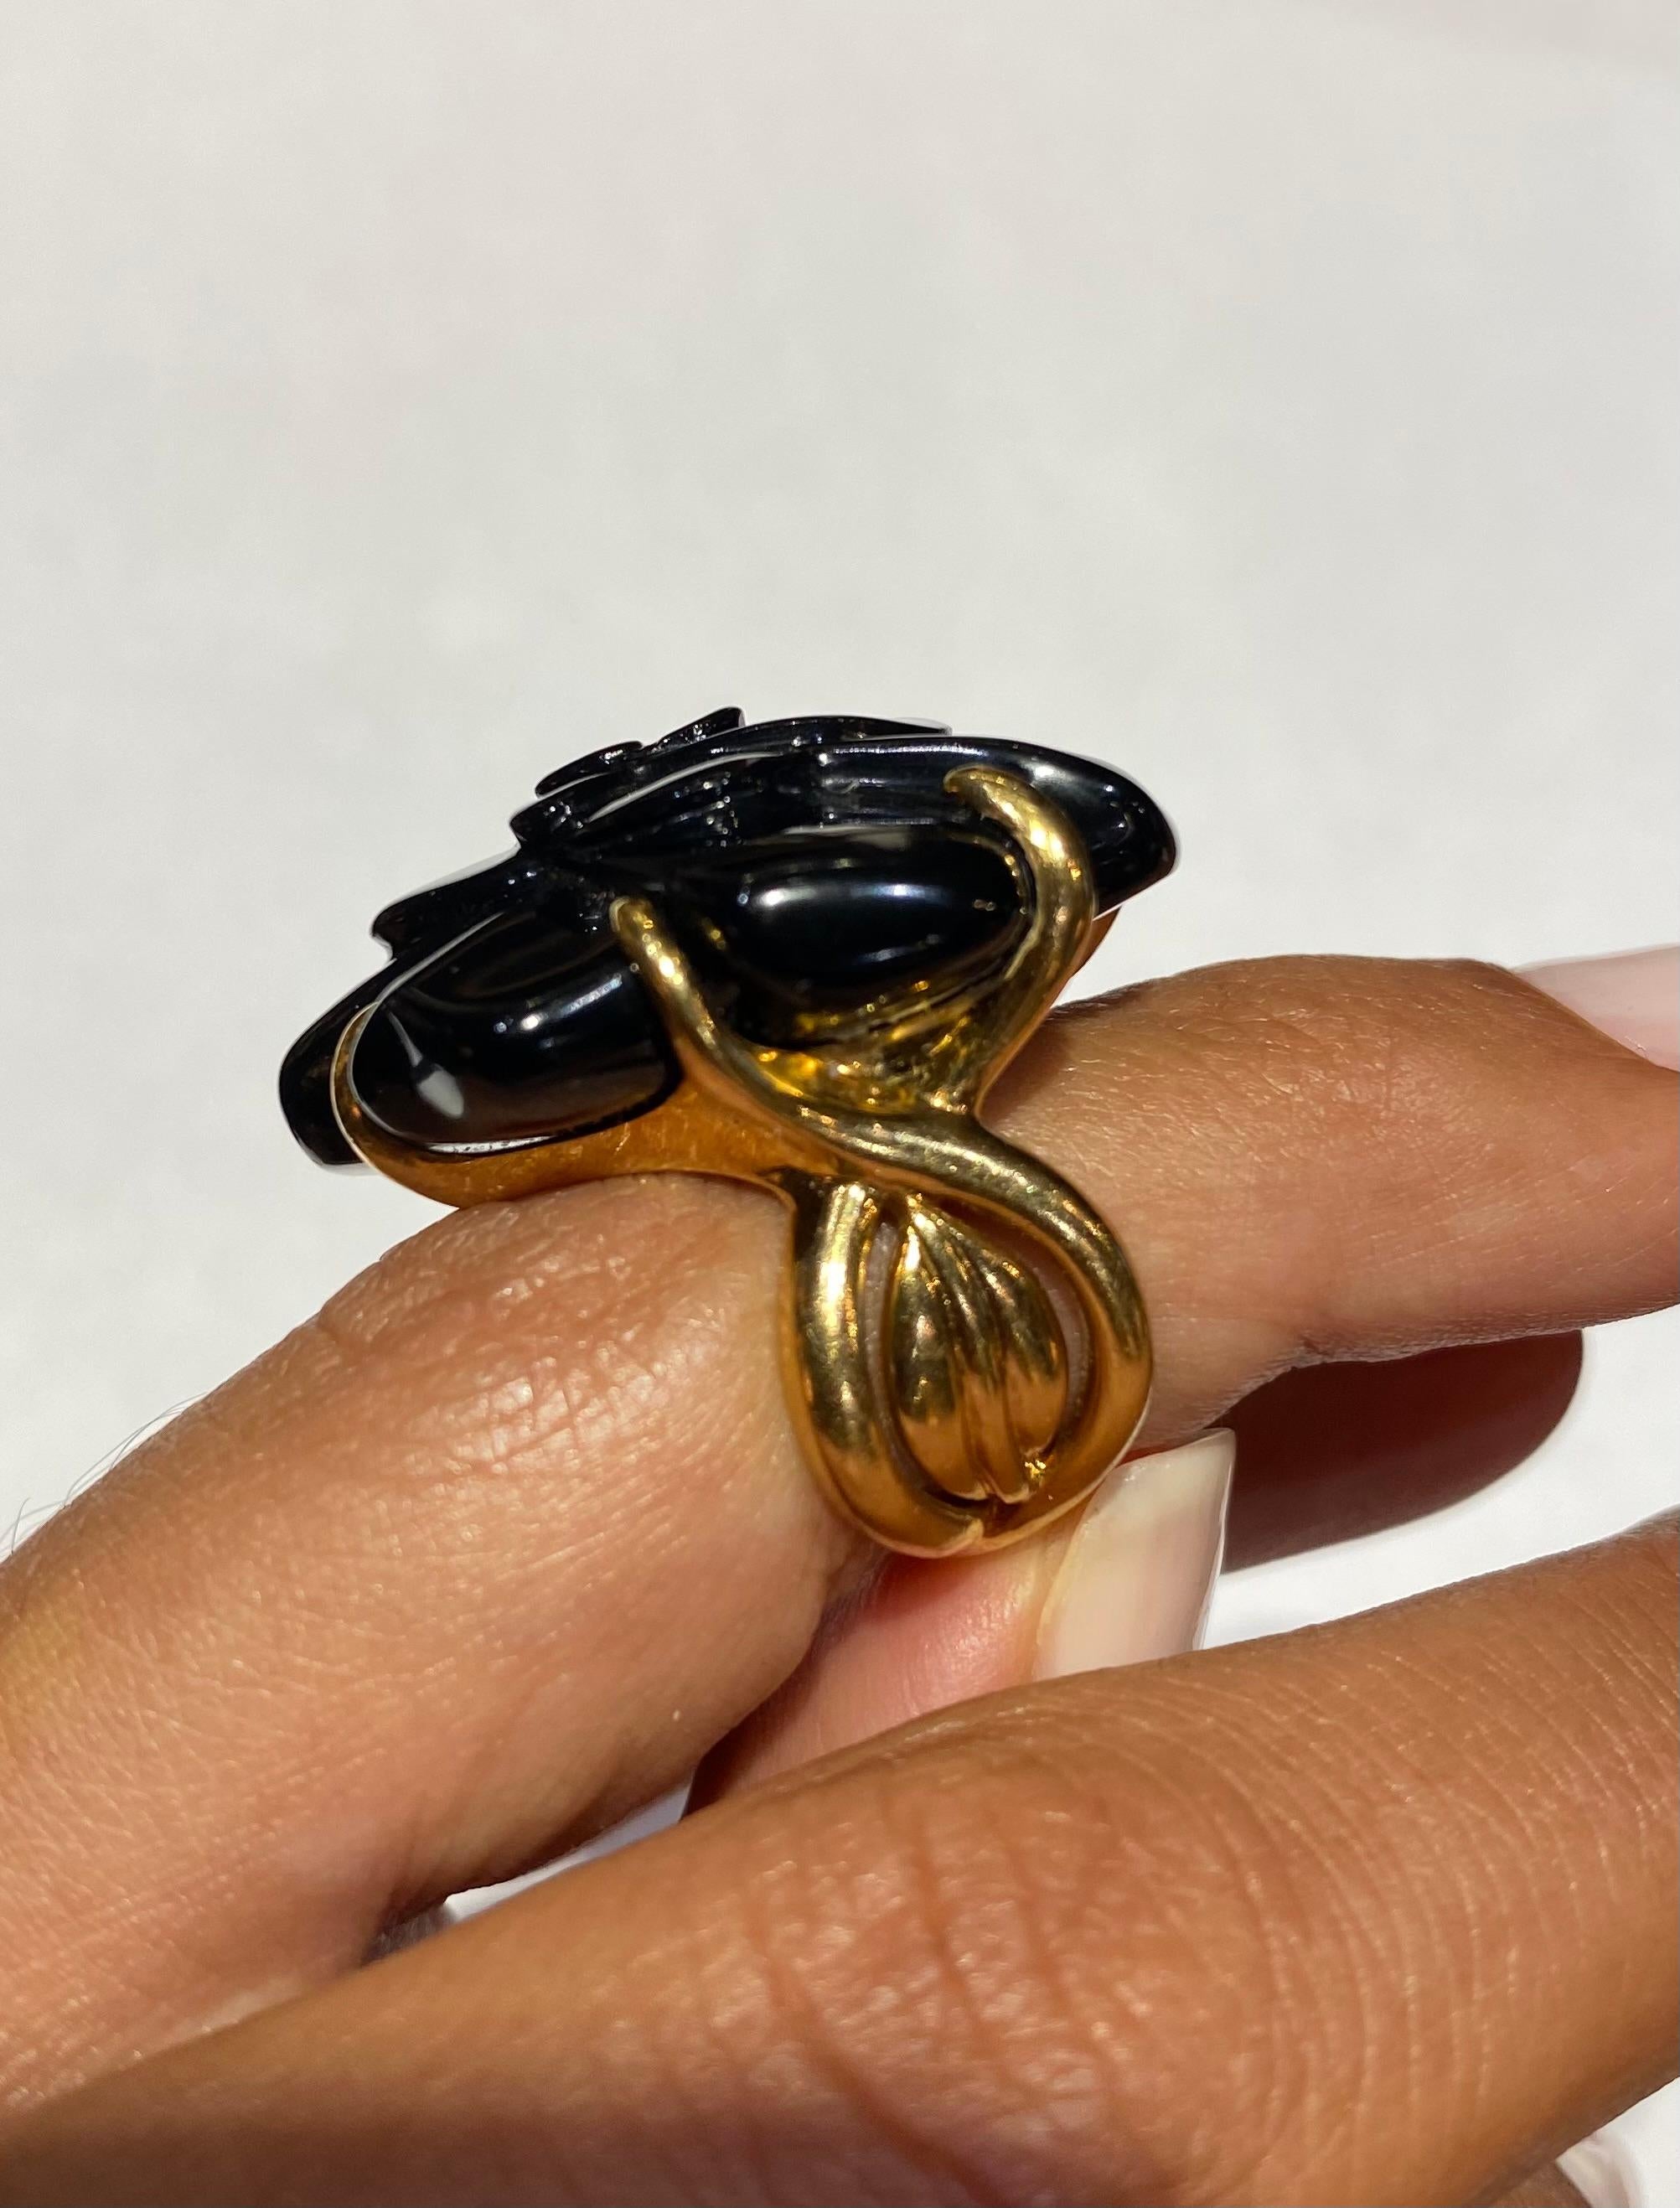 Stunning 18k Gold Chanel Ring. It has a Black Onyx carved 'Camelia' Flower, Coco Chanel's favorite flower and an iconic emblem of the brand. The ring is pre-owned and in Excellent Condition. 